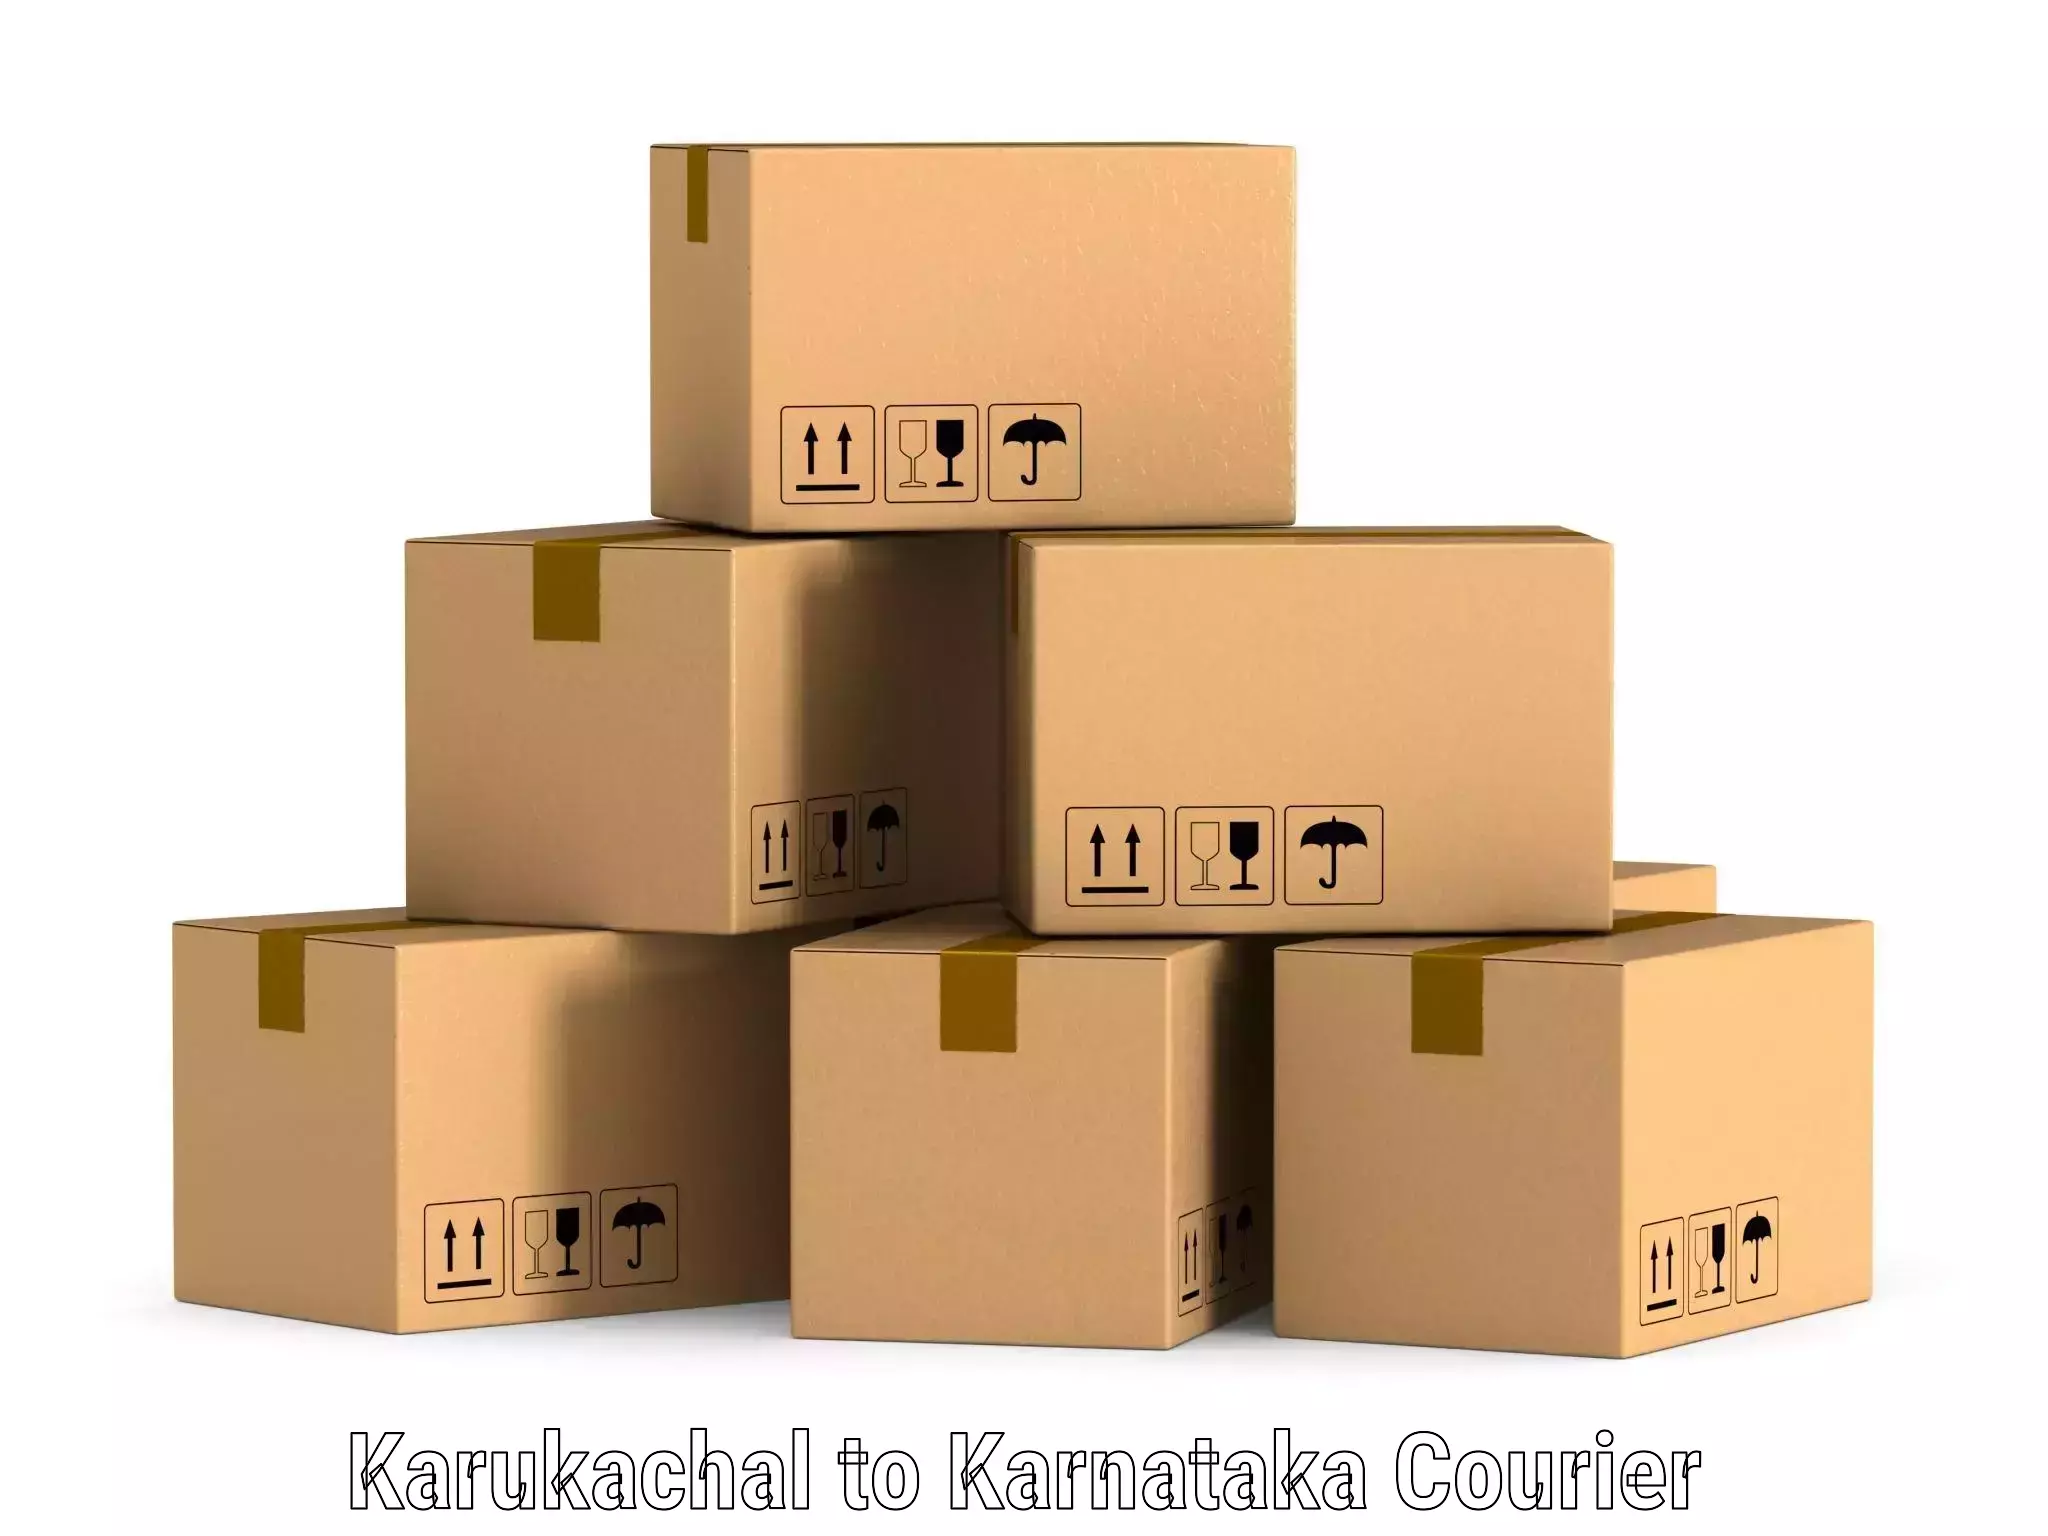 State-of-the-art courier technology Karukachal to Magadi